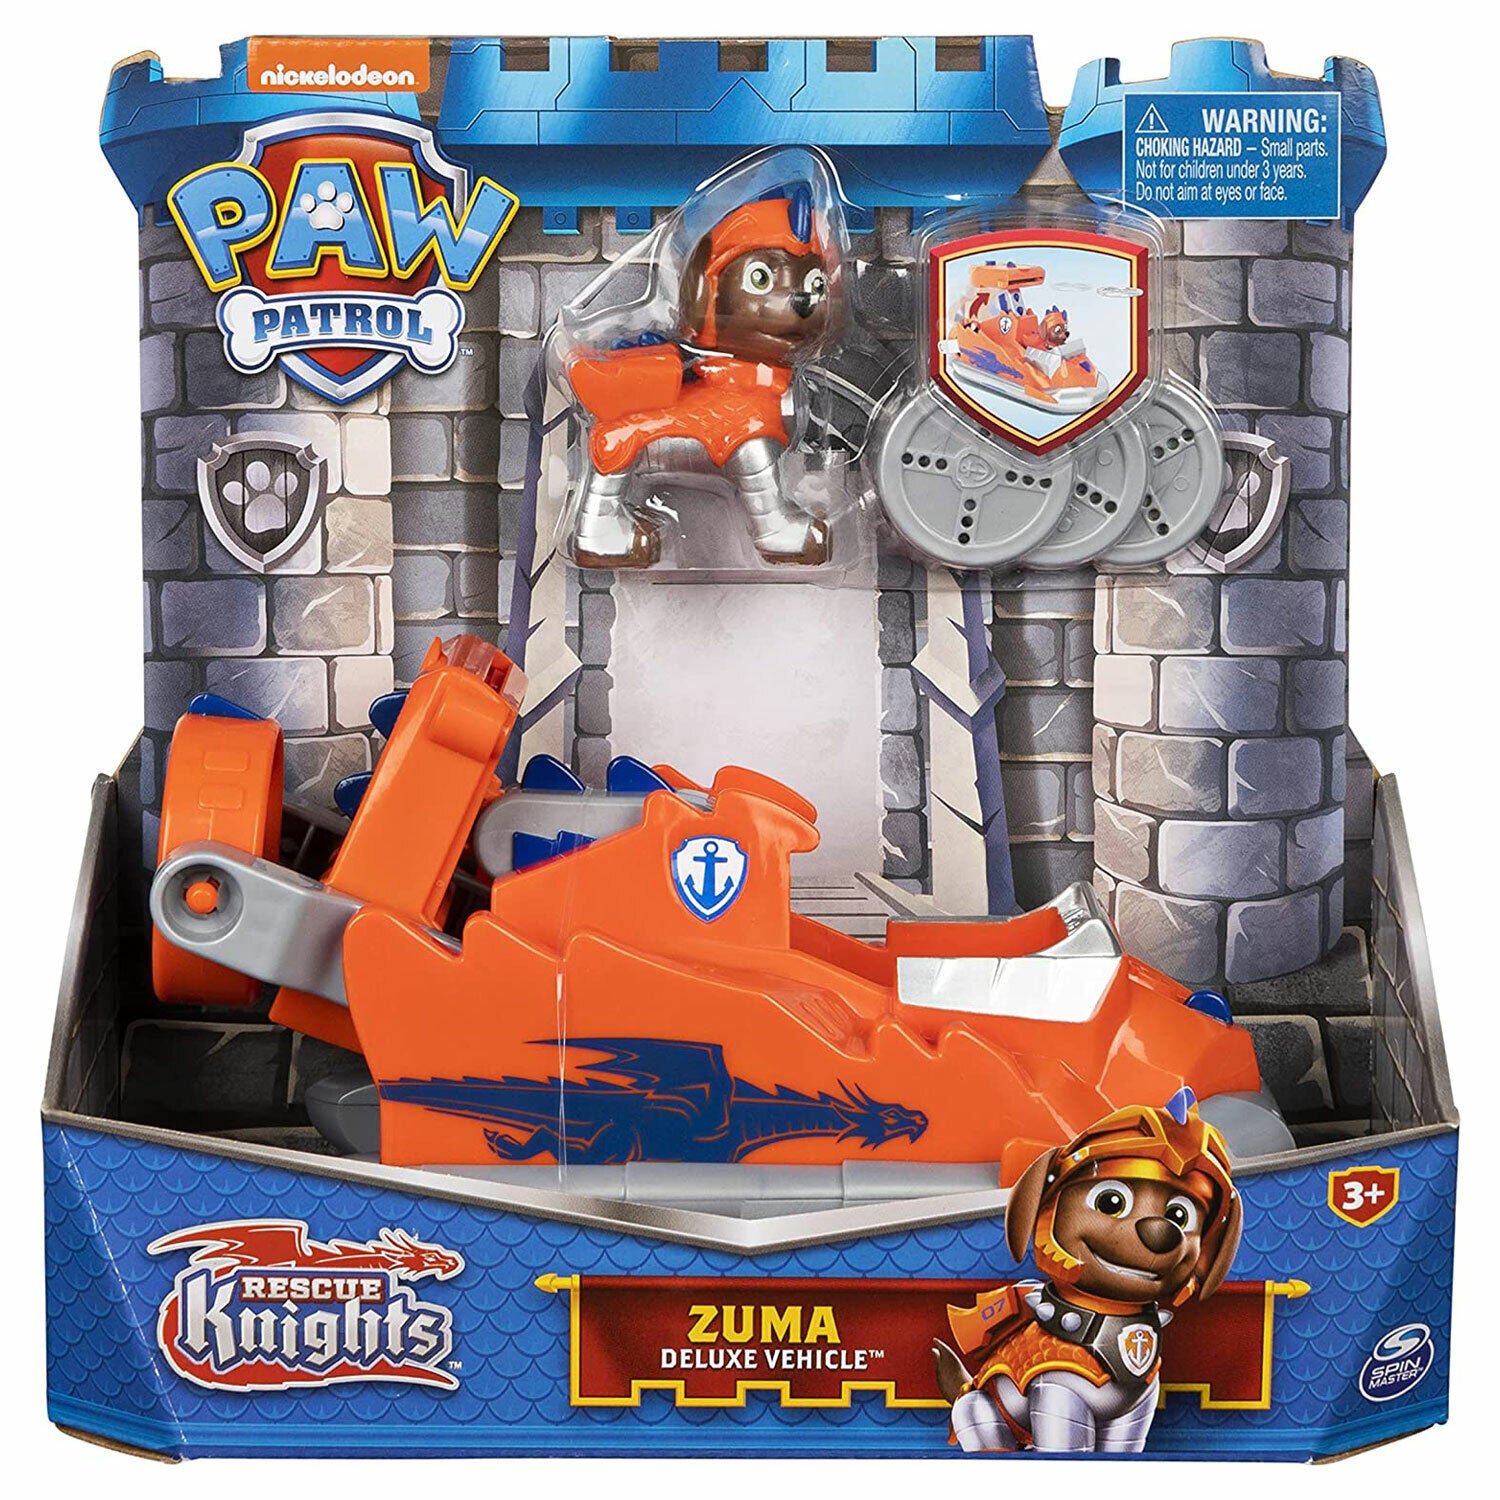 New PAW Patrol Rescue Knights Zuma Deluxe Vehicle - Ready for Adventure!